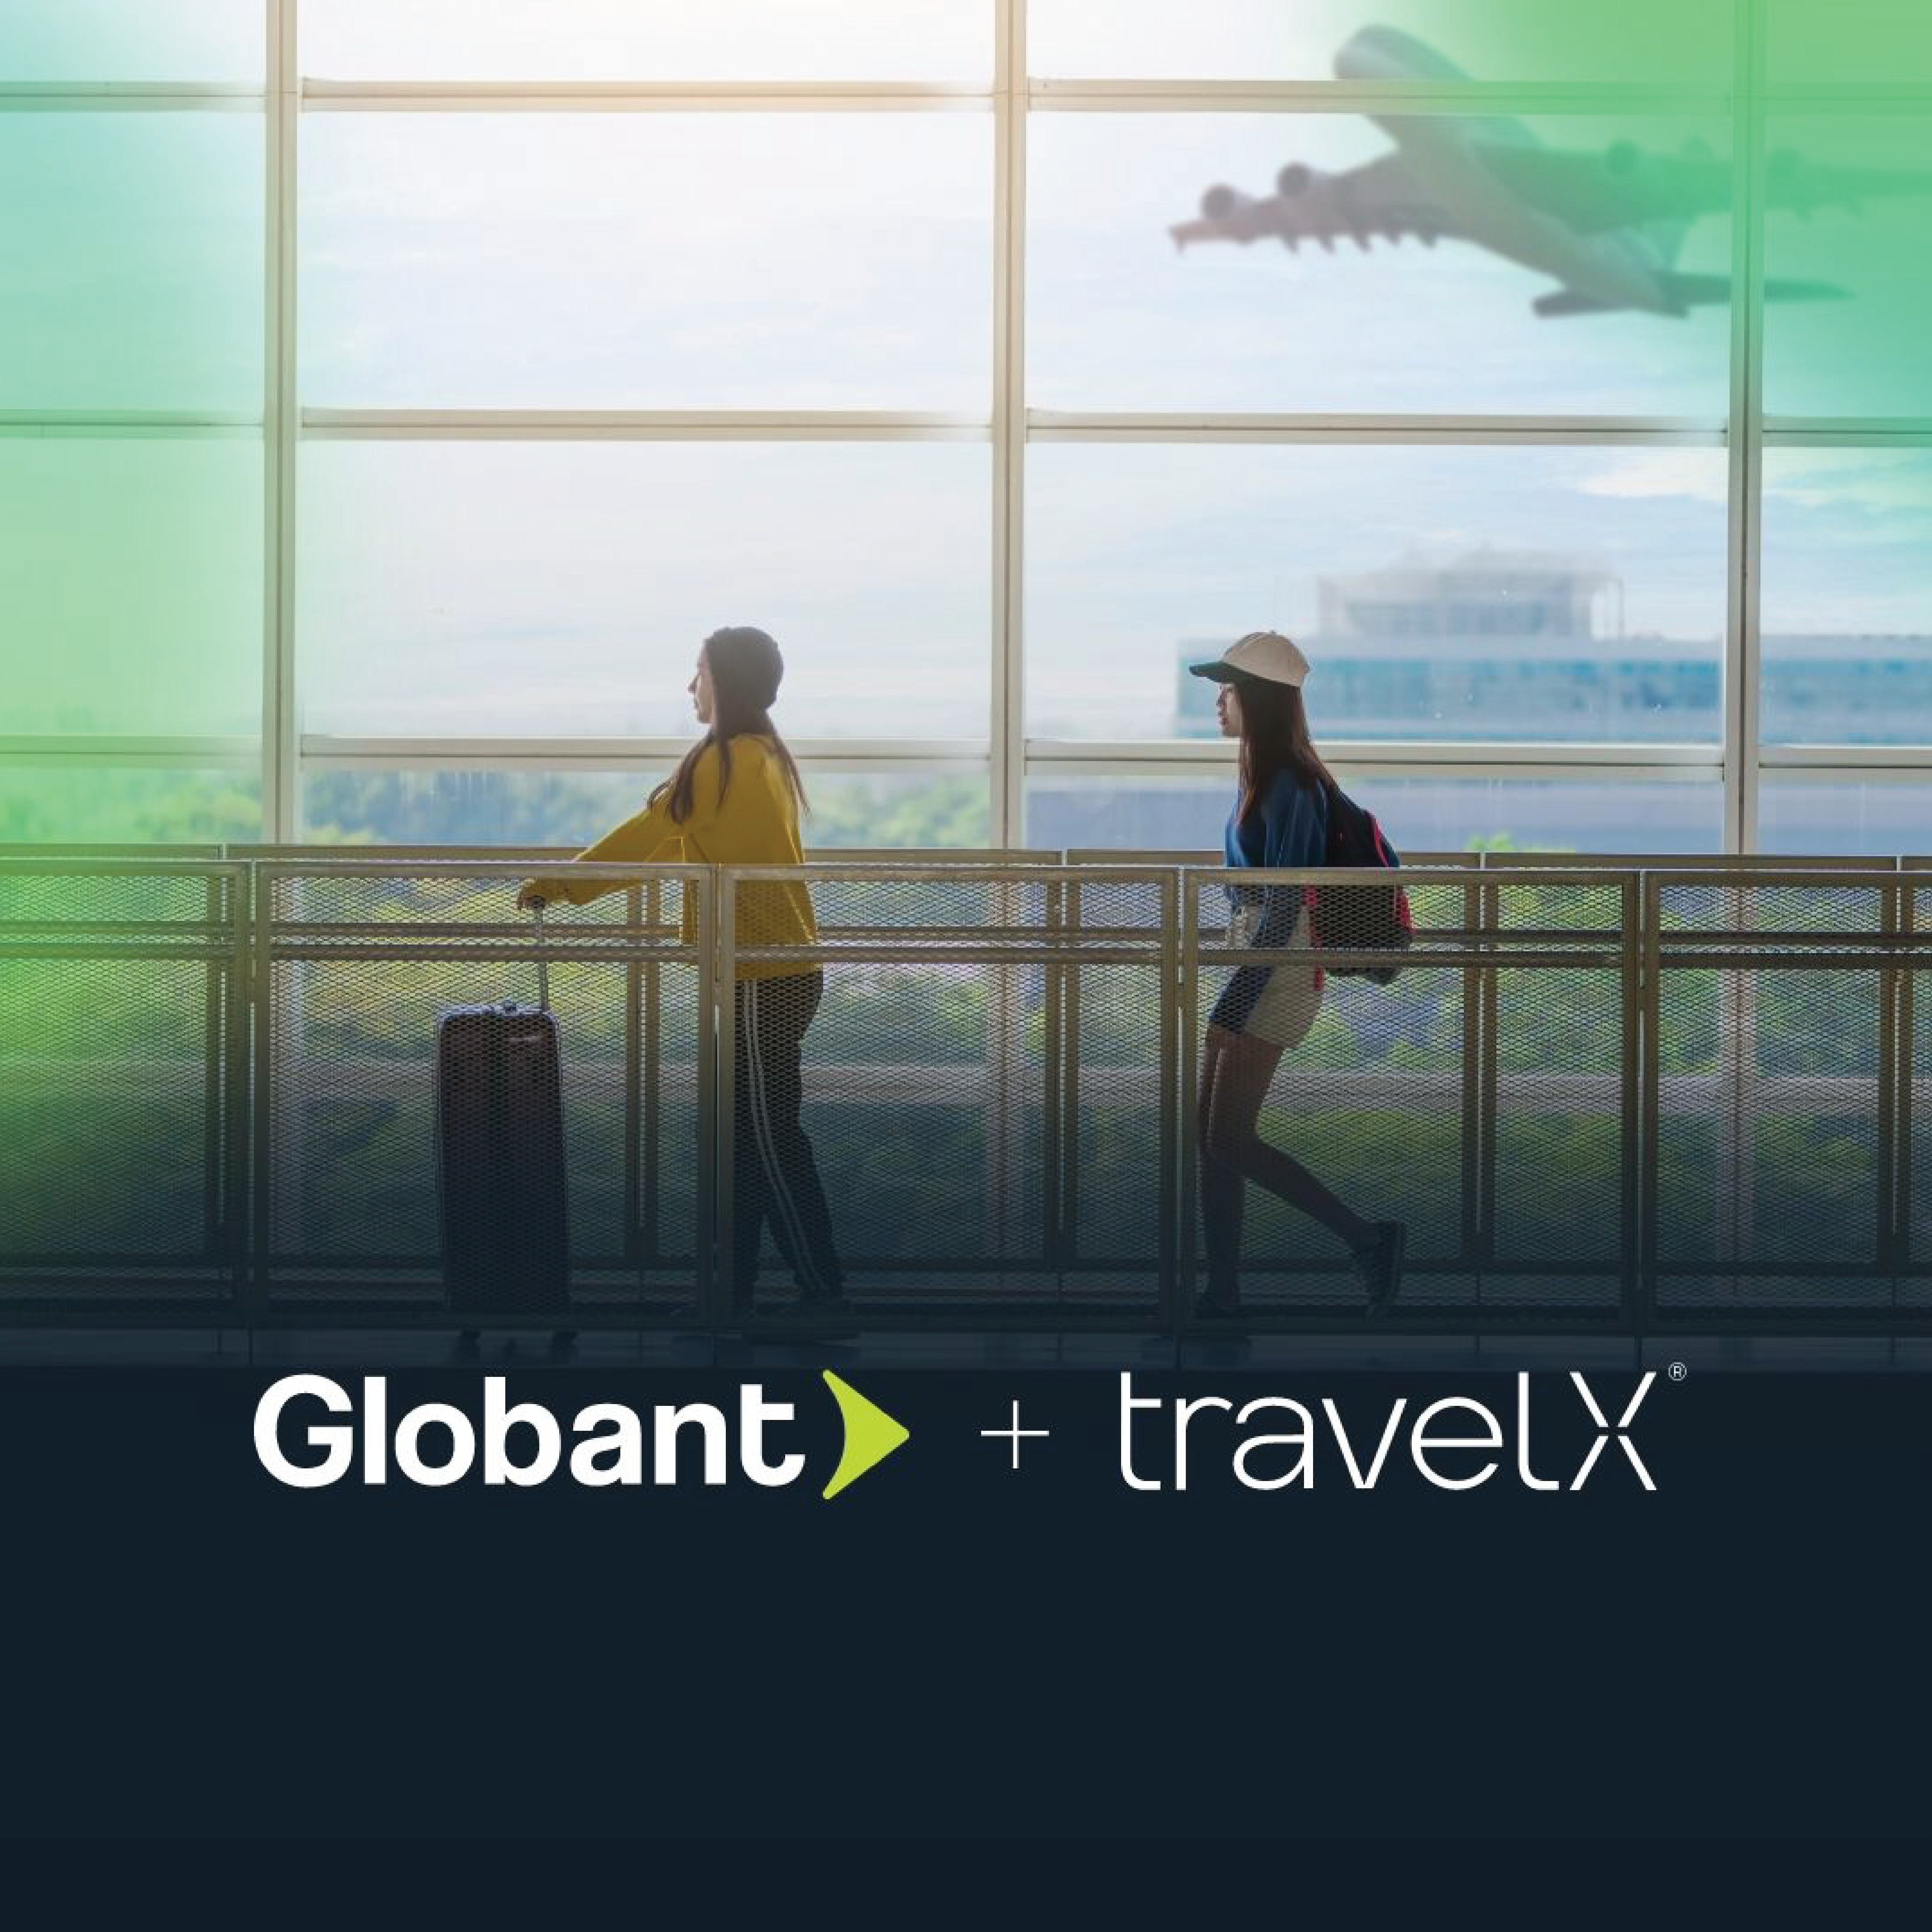 Globant and TravelX team up to transform the airline industry with blockchain technology.